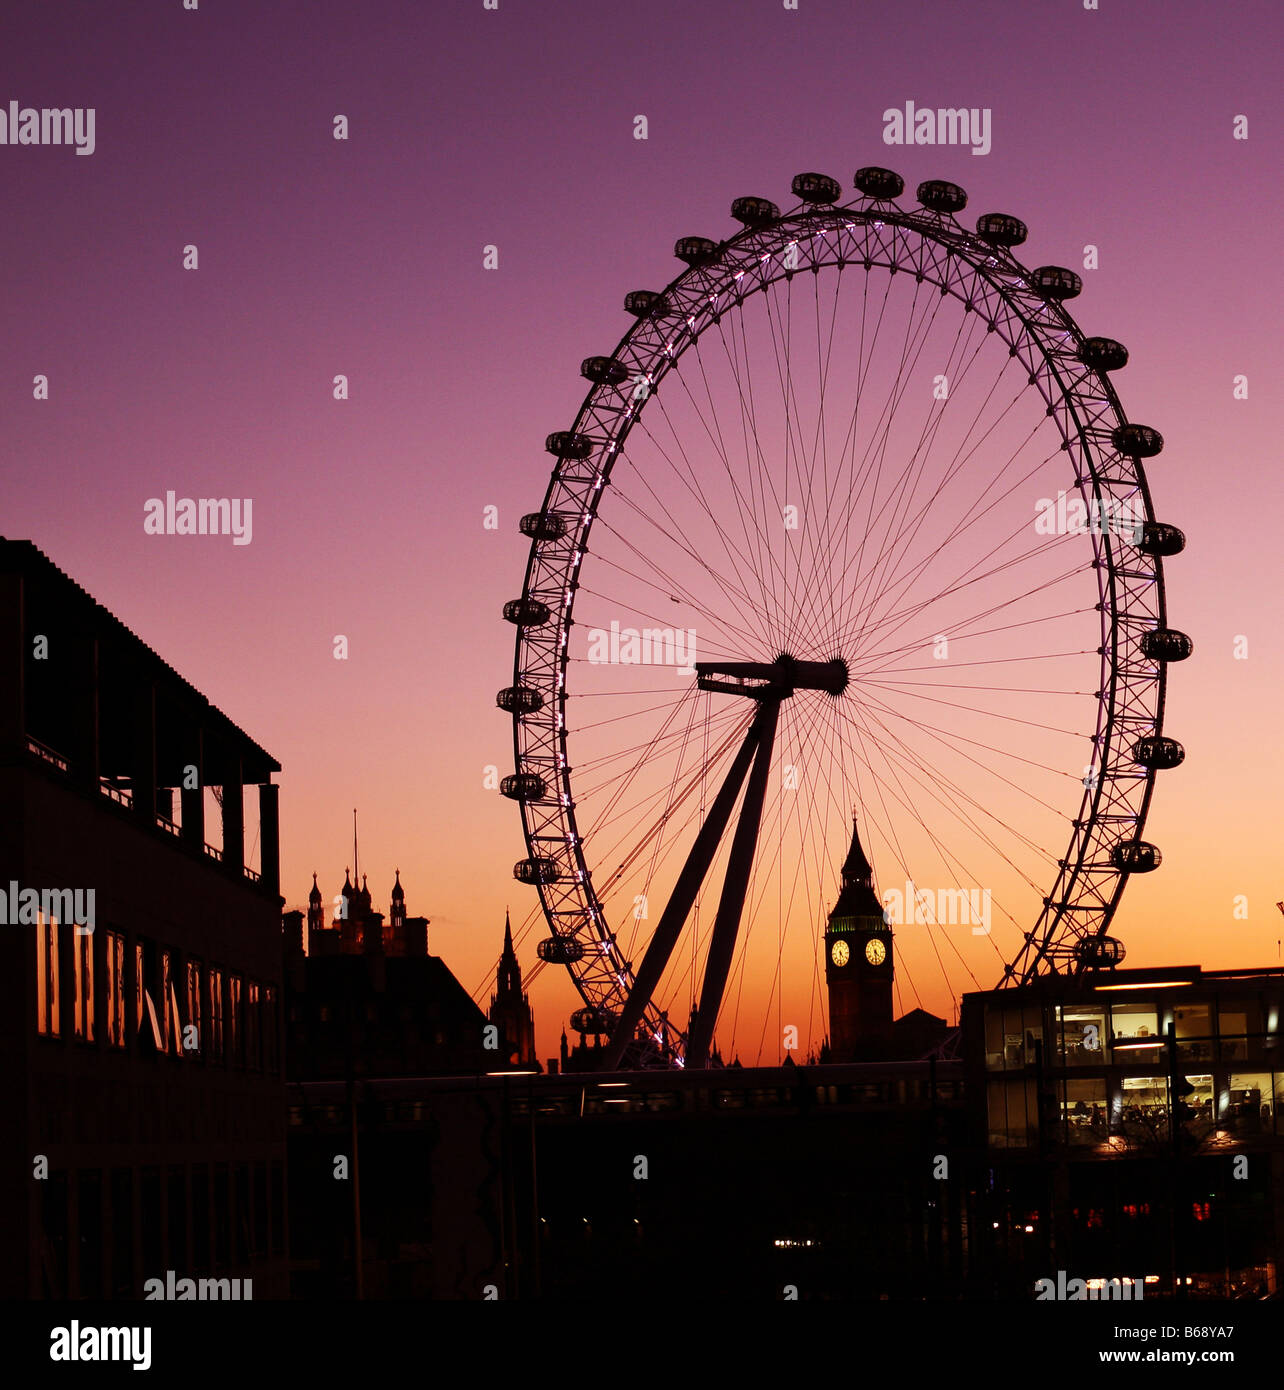 London landscape at sunset with London eye and Big Ben in the background. Stock Photo